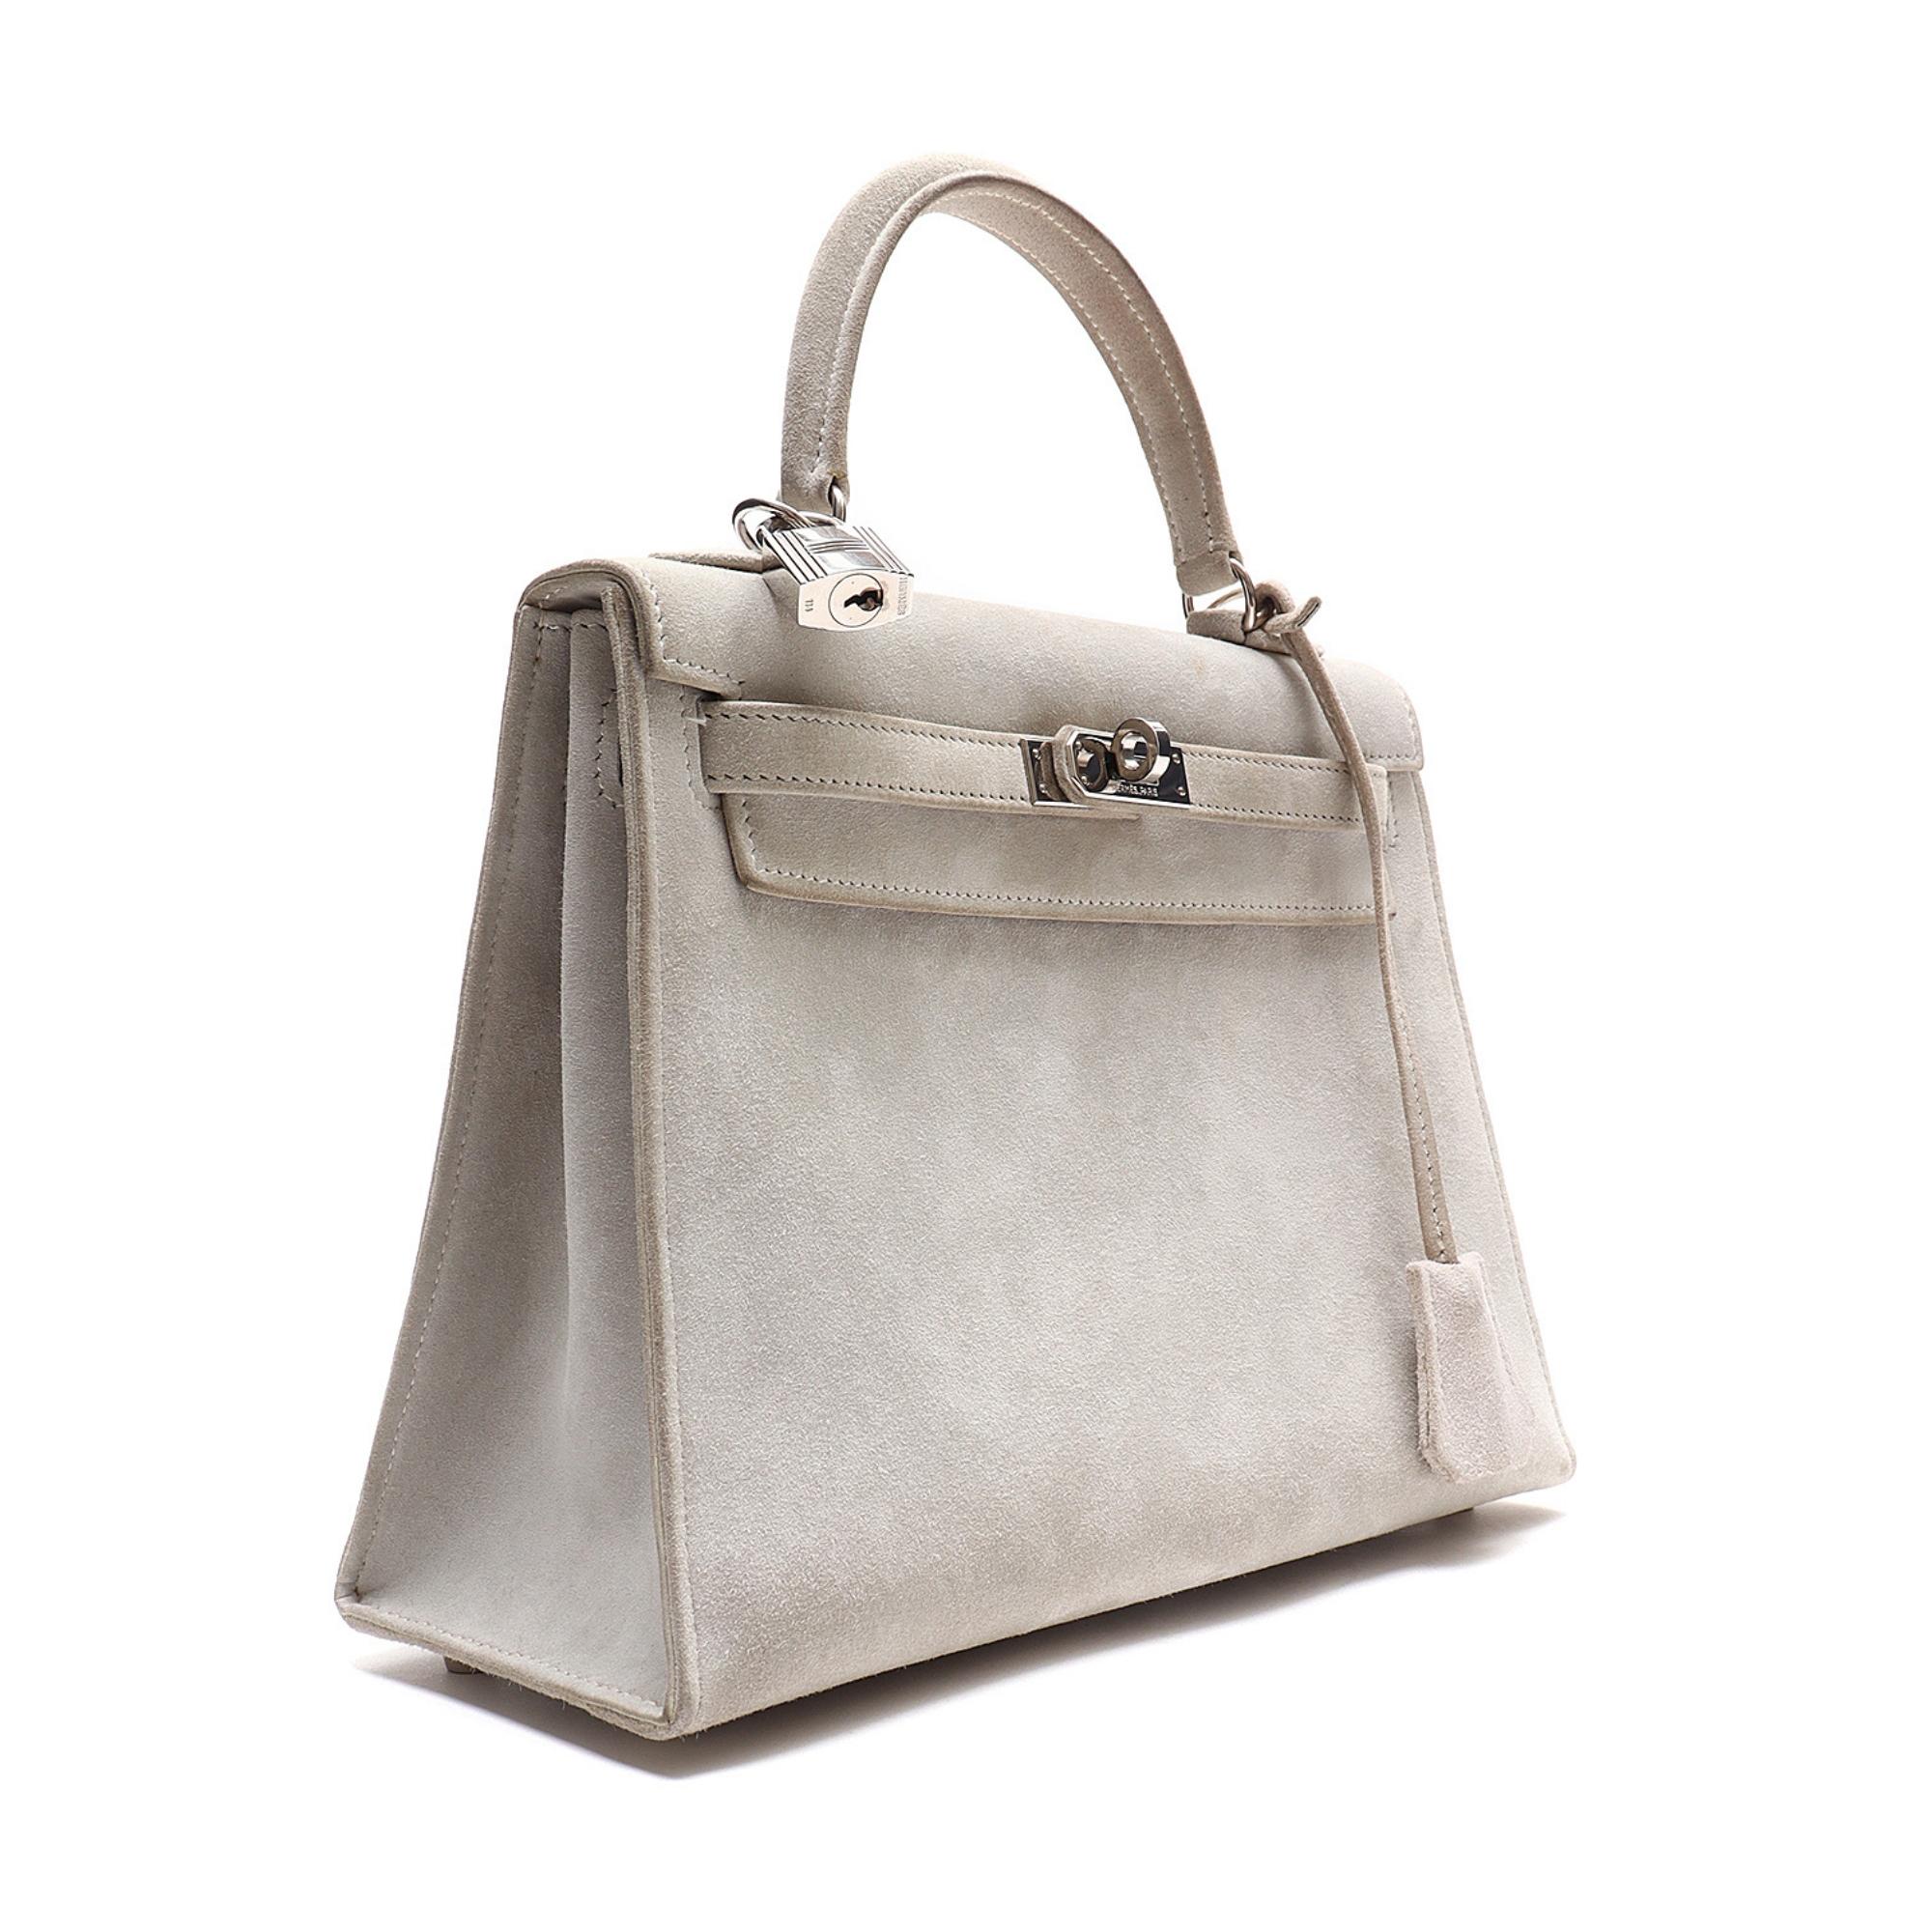 This iconic and classic handbag is constructed of suede in high grey Doblis. The bag features a sturdy suede top handle, an optional shoulder strap, and a crossover flap and strap closure with a silver plated signature Kelly turn lock and padlock